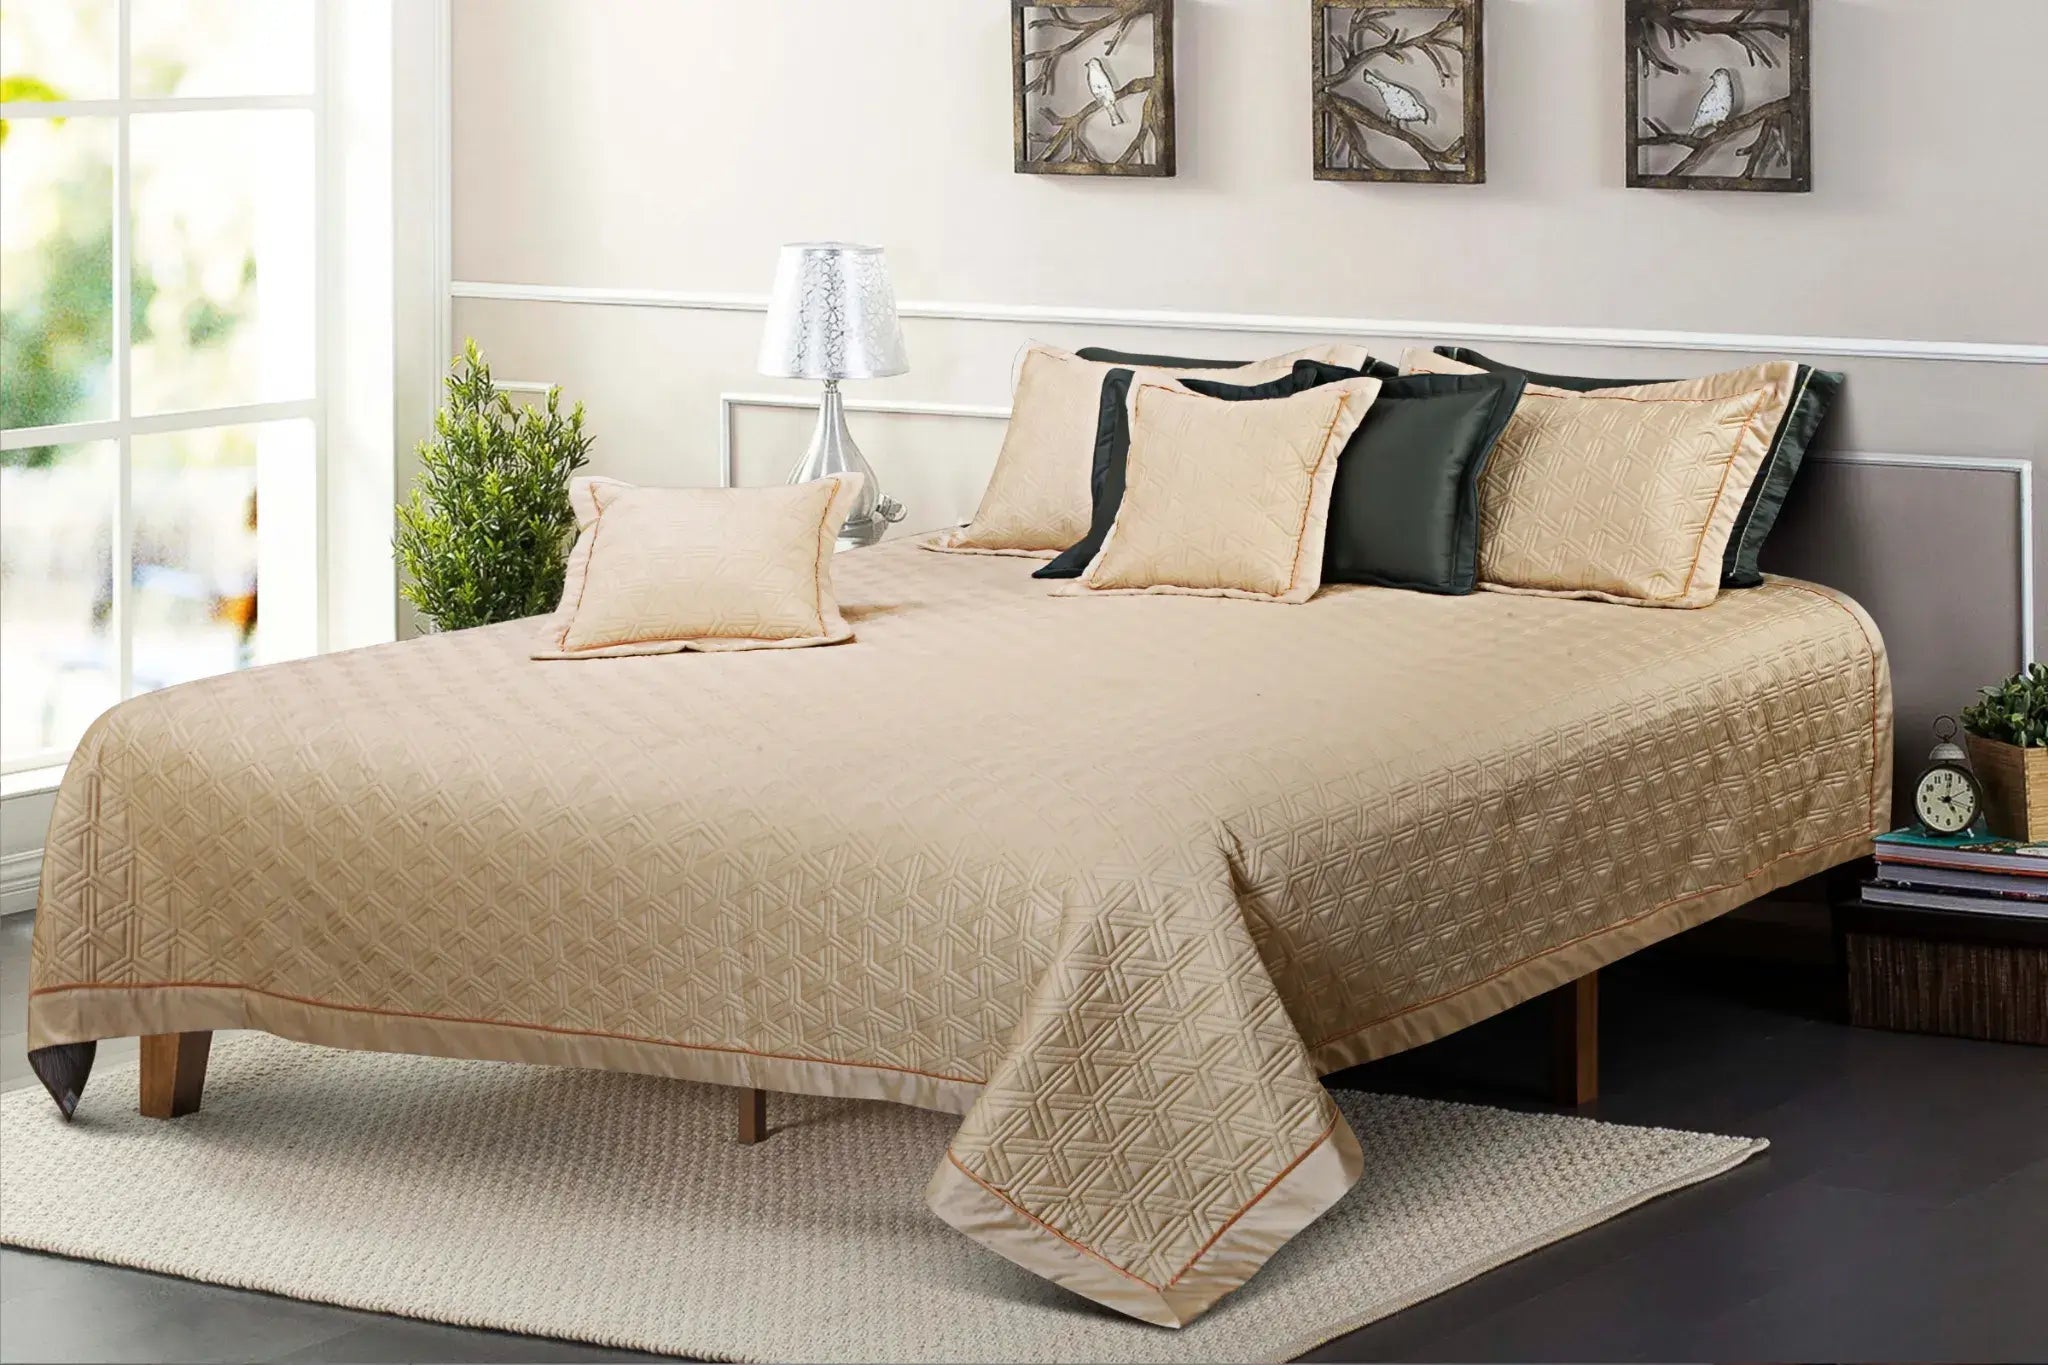 Malako Kairo 500 TC Beige Solid King Size 100% Cotton Quilted Bed Cover Set - MALAKO